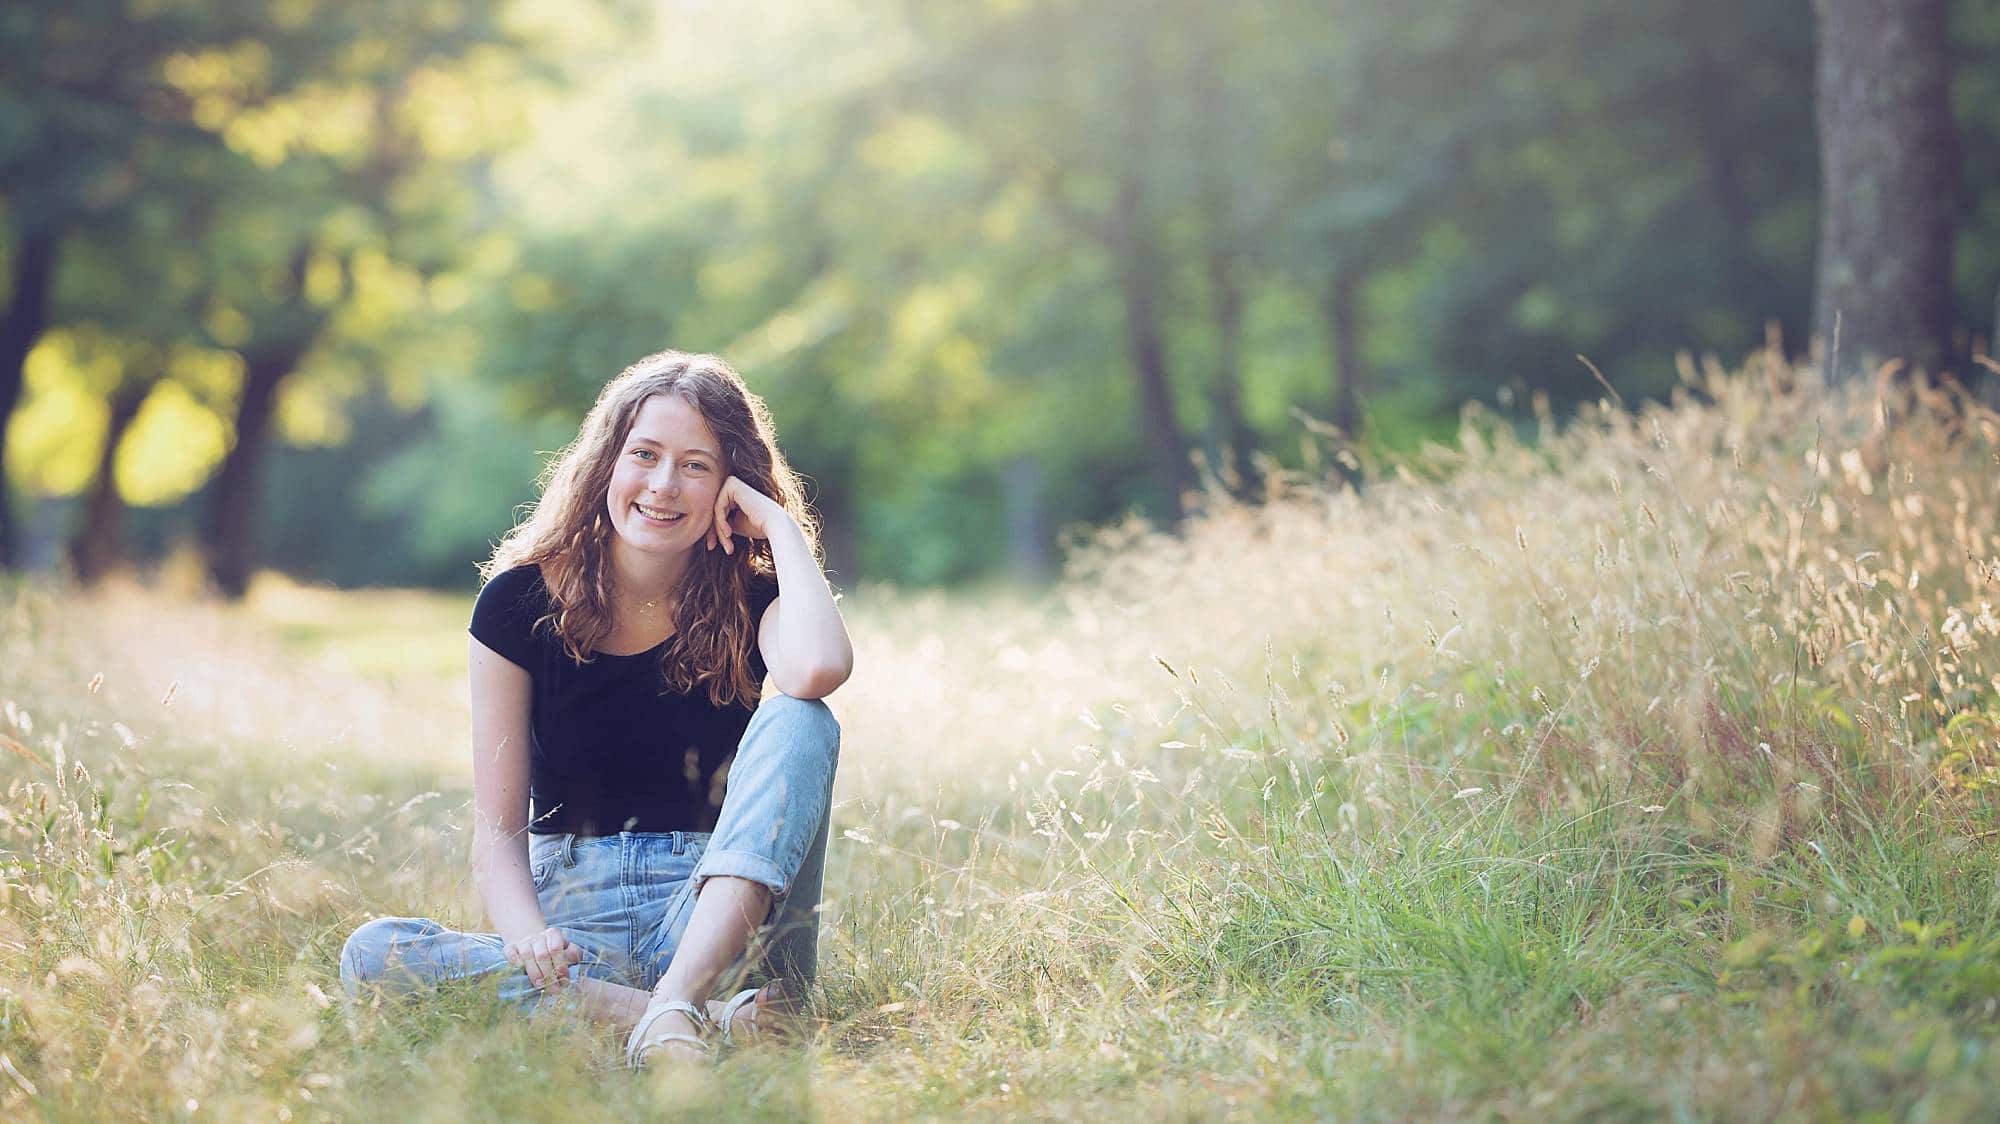 image of a senior girl with dark curly hair, wearing jeans and a black t-shirt, sitting in a grassy field with her elbow on her knee and the sun streaming behind her.